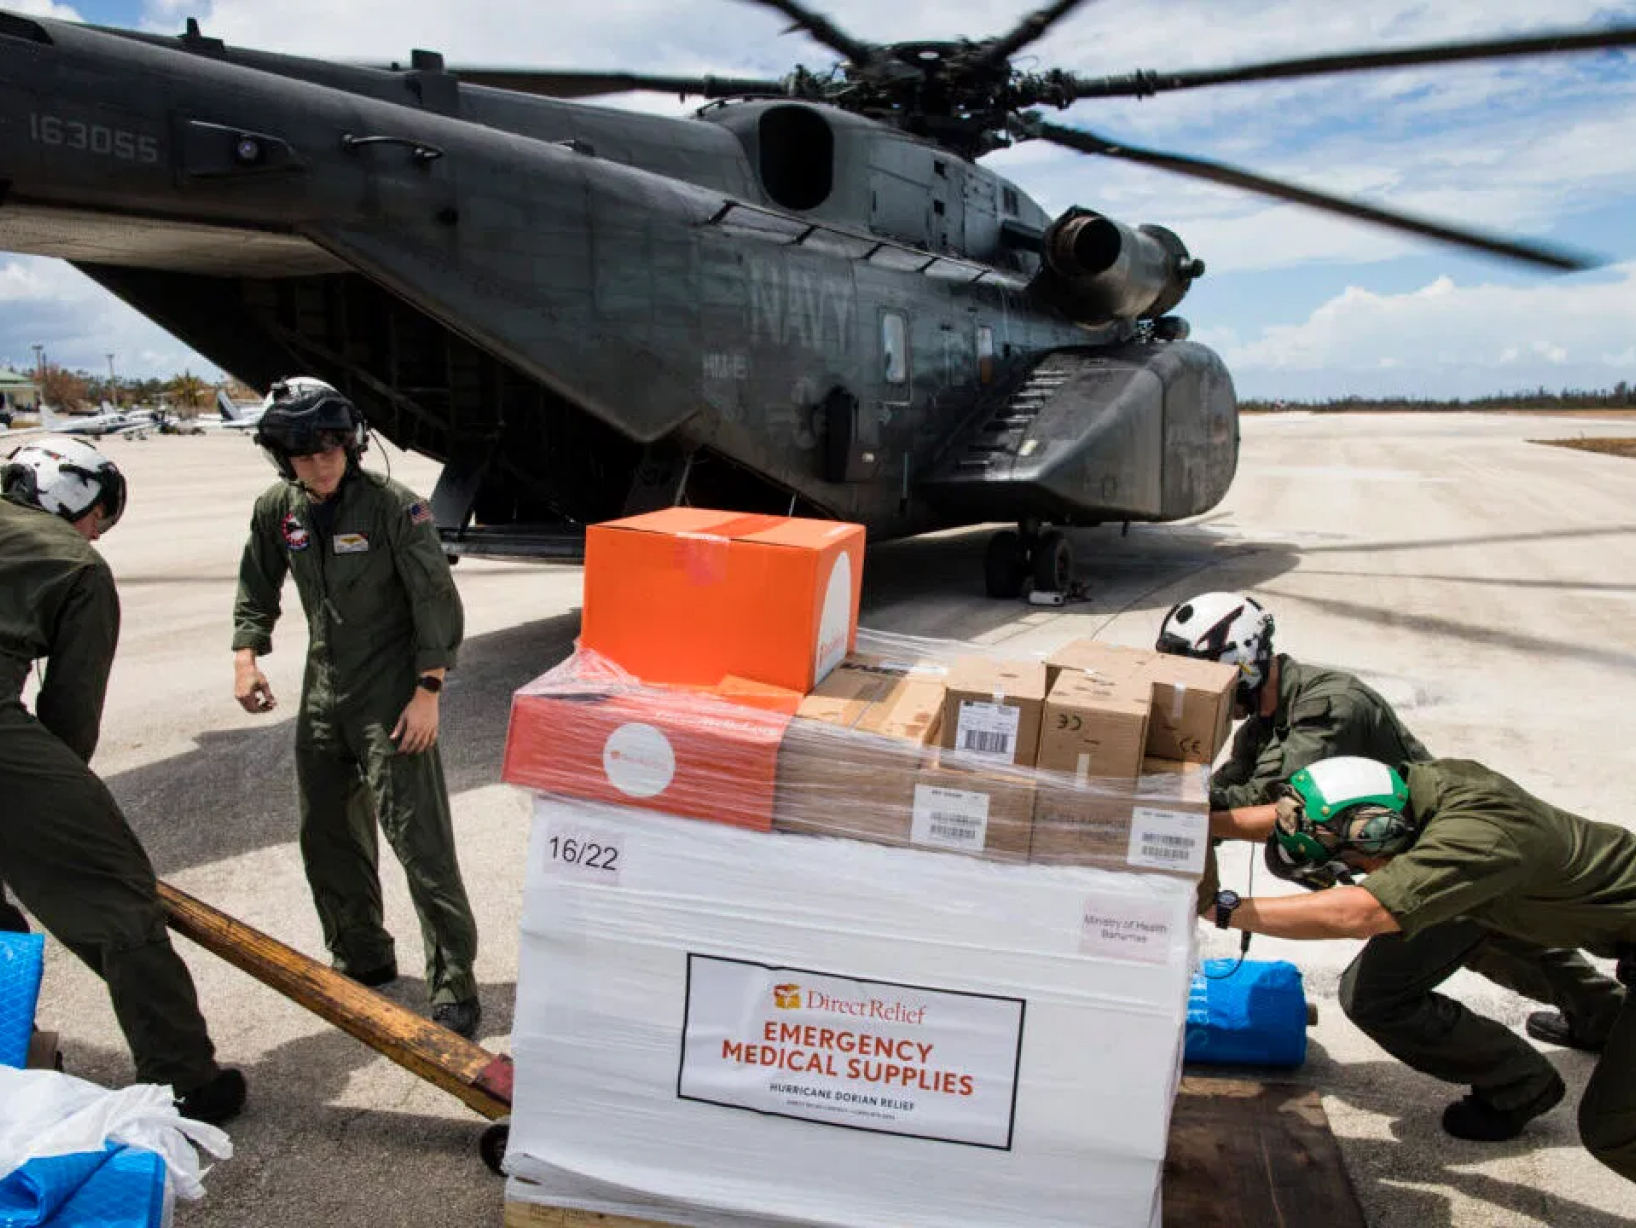 Four men in helmets pushing a pallet labelled emergency medical supplies into a large black Navy helicopter